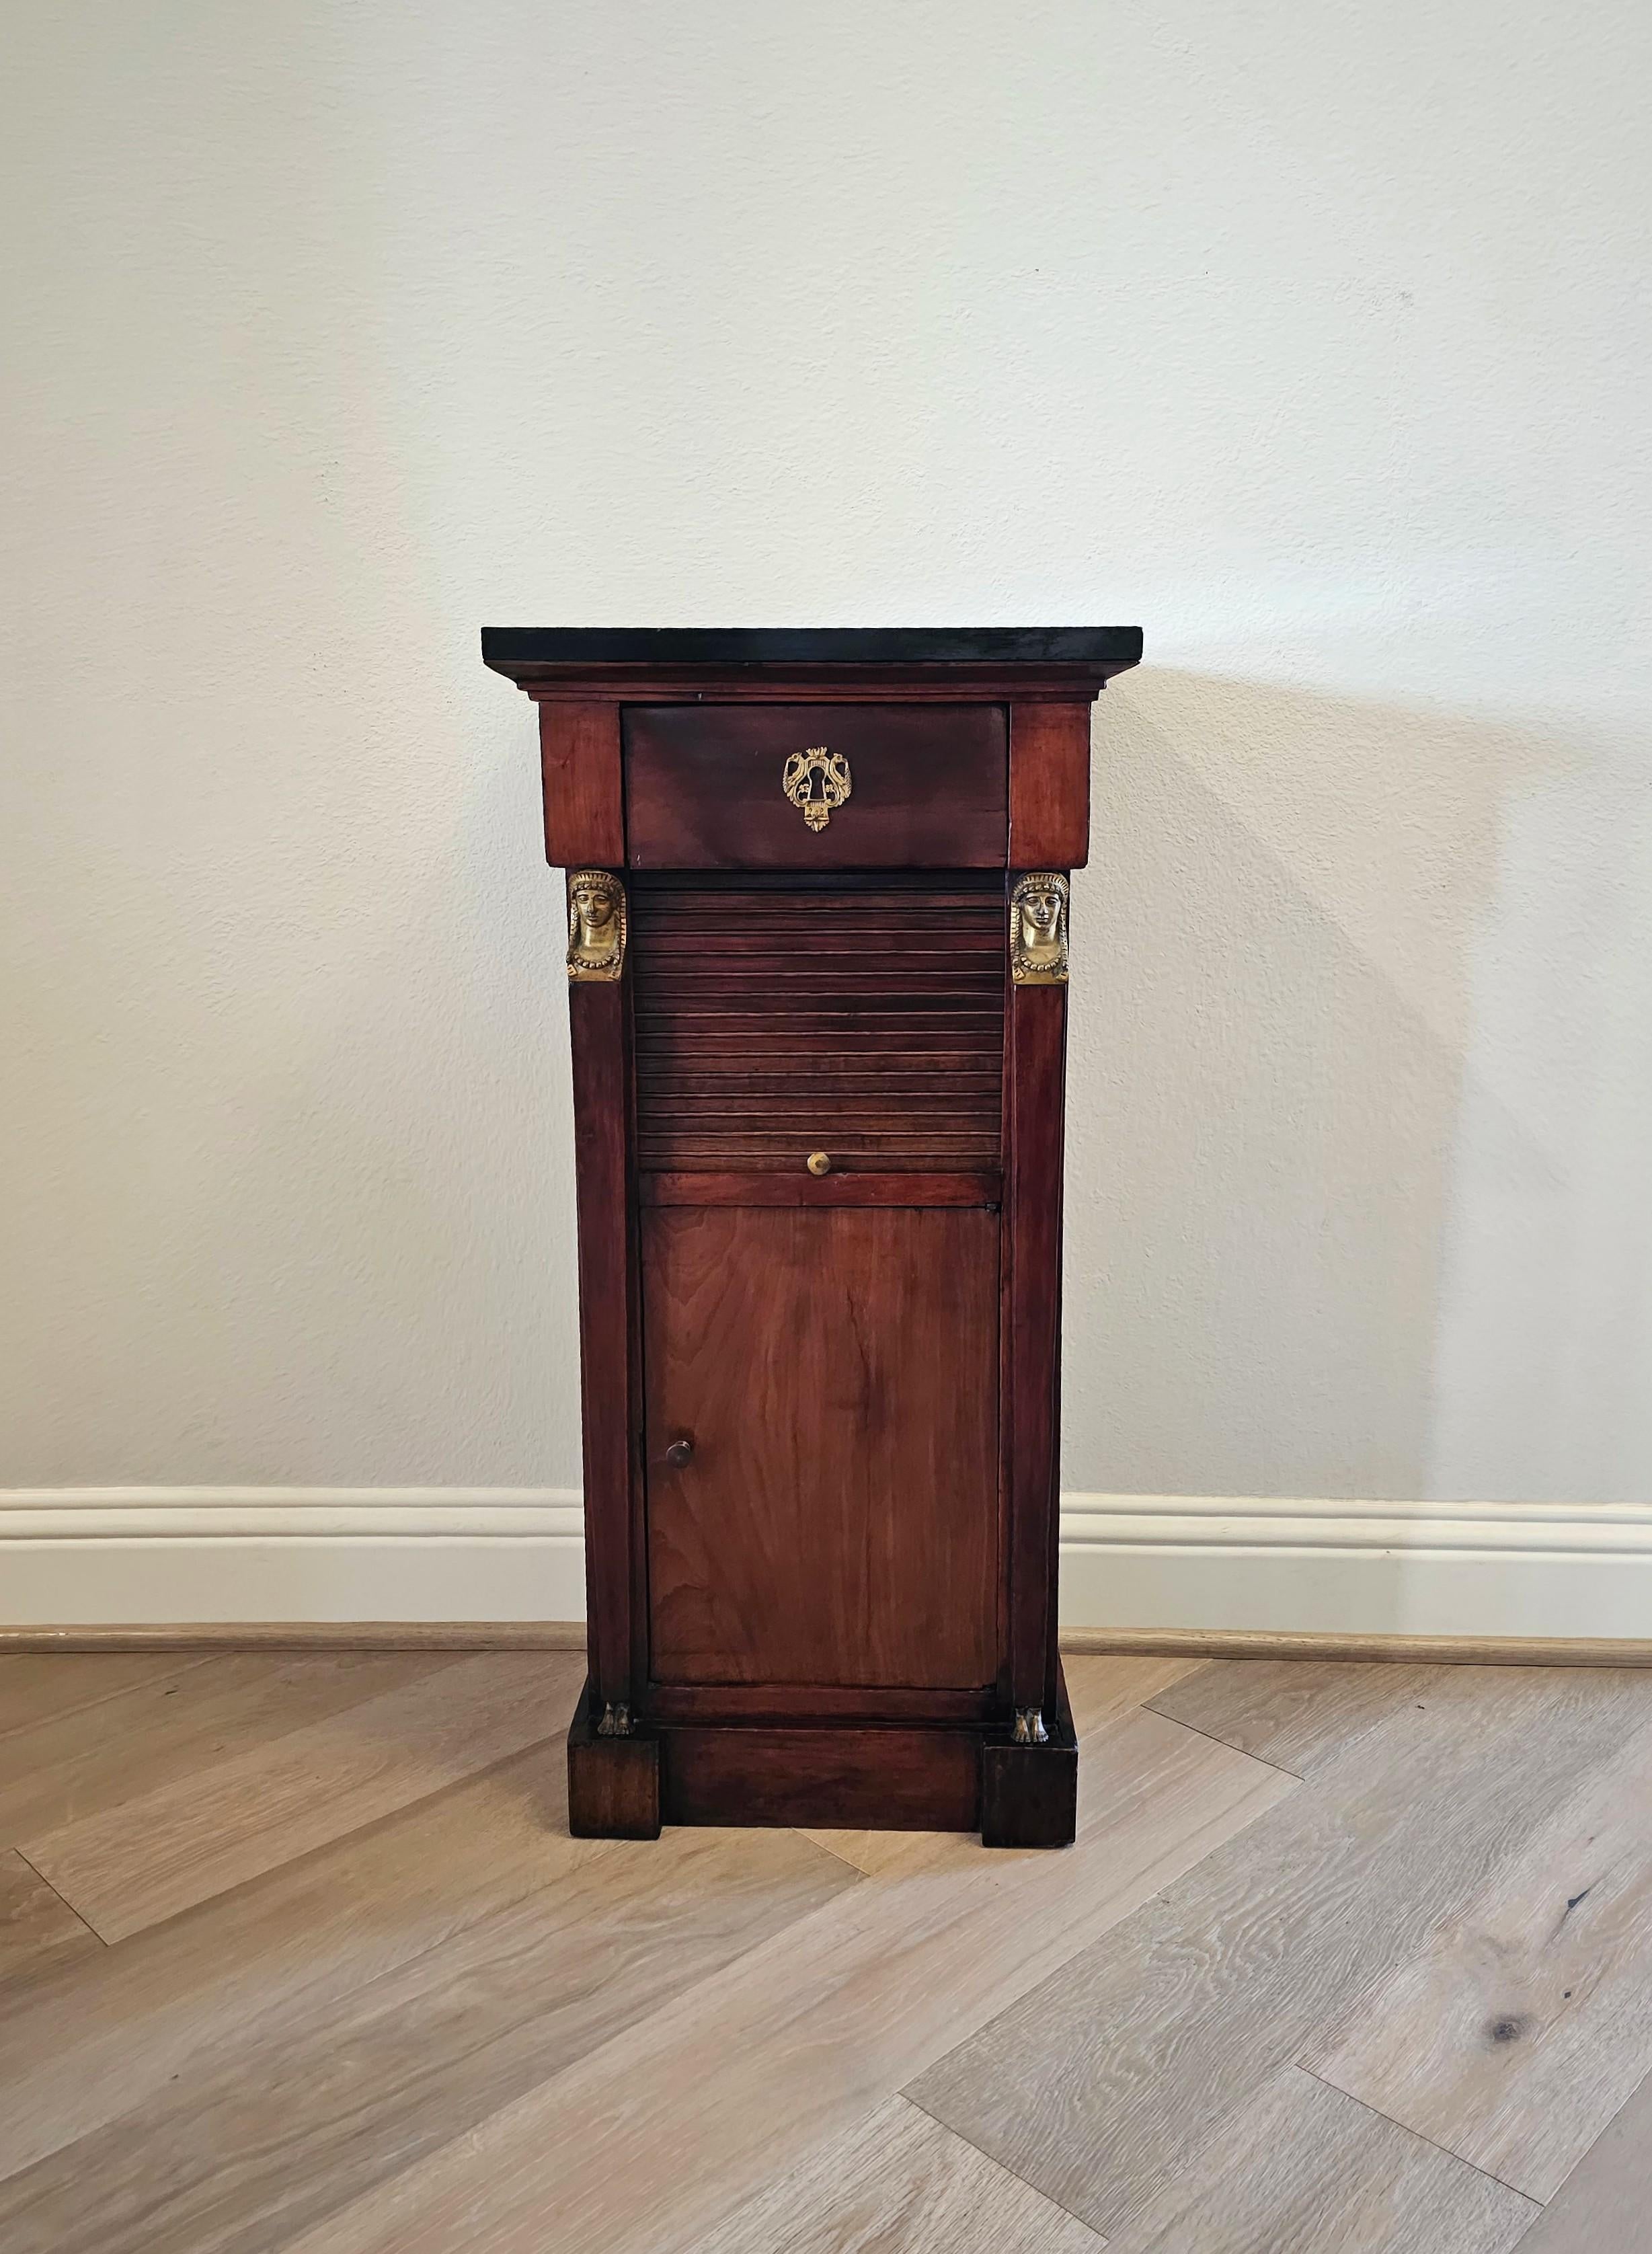 A rare antique Balkans Empire style marble-top bedside cabinet. circa 1830

Born in Southeastern Europe in the first half of the 19th century, most likely along the Mediterranean in present day Albania, hand-crafted of warm rich mahogany with